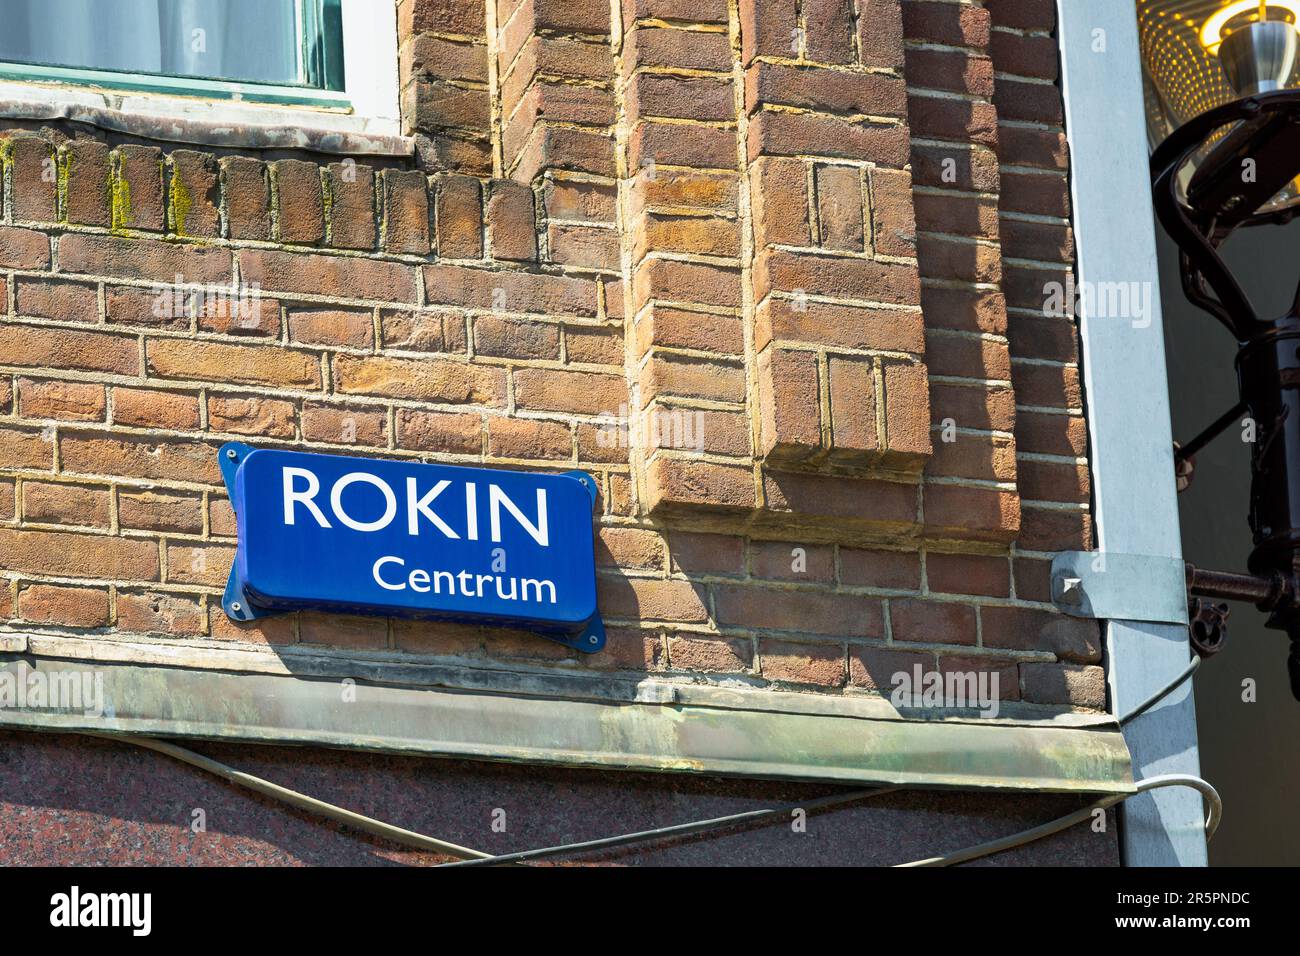 Rokin Street Sign in Amsterdam, The Netherlands. Rokin is a canal and major street in the centre of Amsterdam. Rokin also has its own Metro Station. Stock Photo